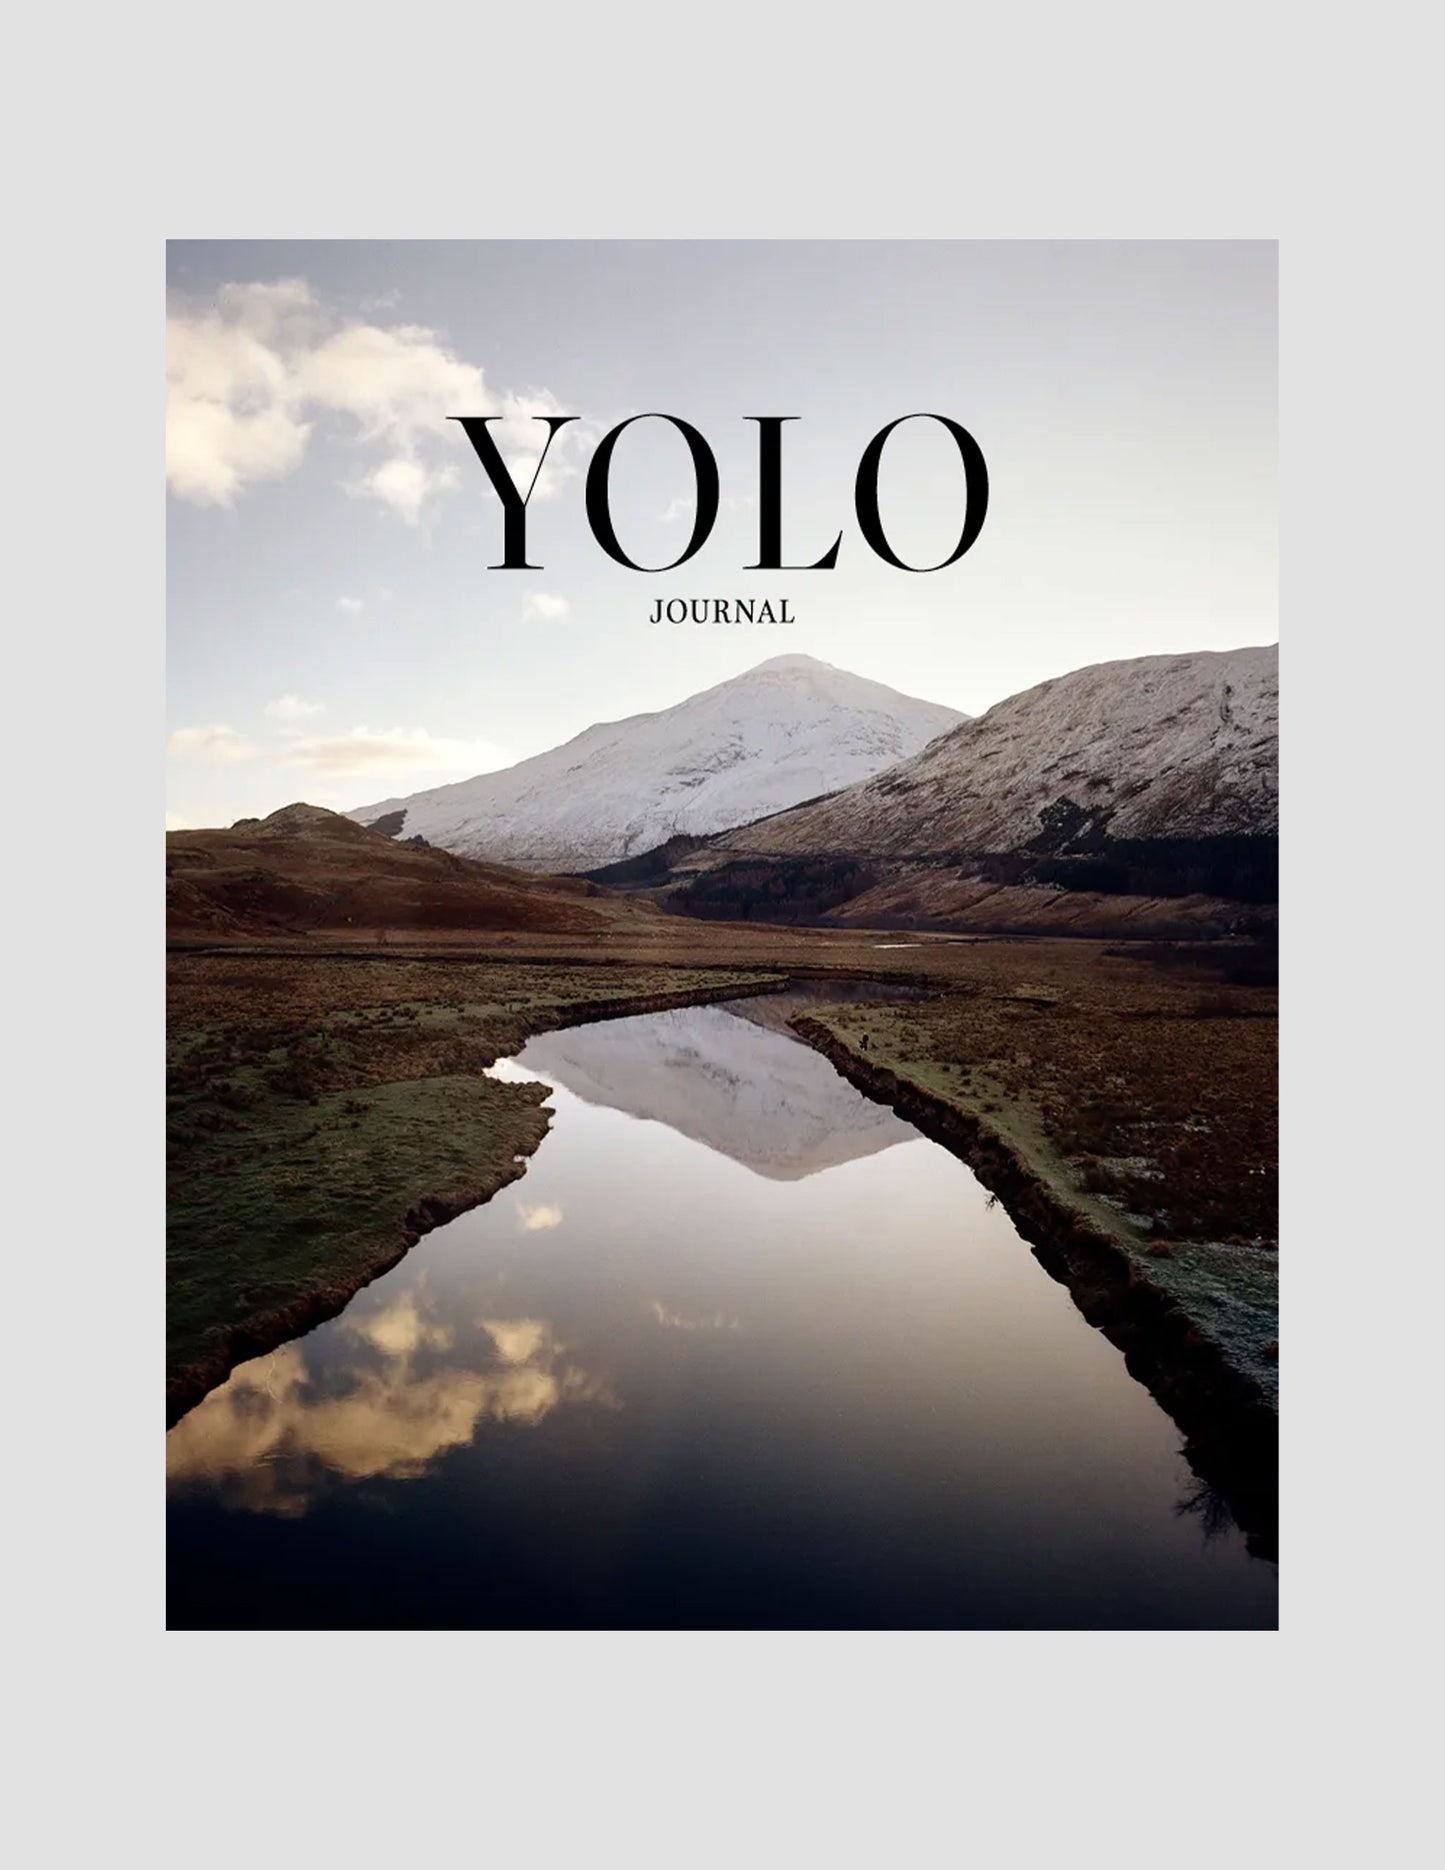 YOLO Journal Issue 14